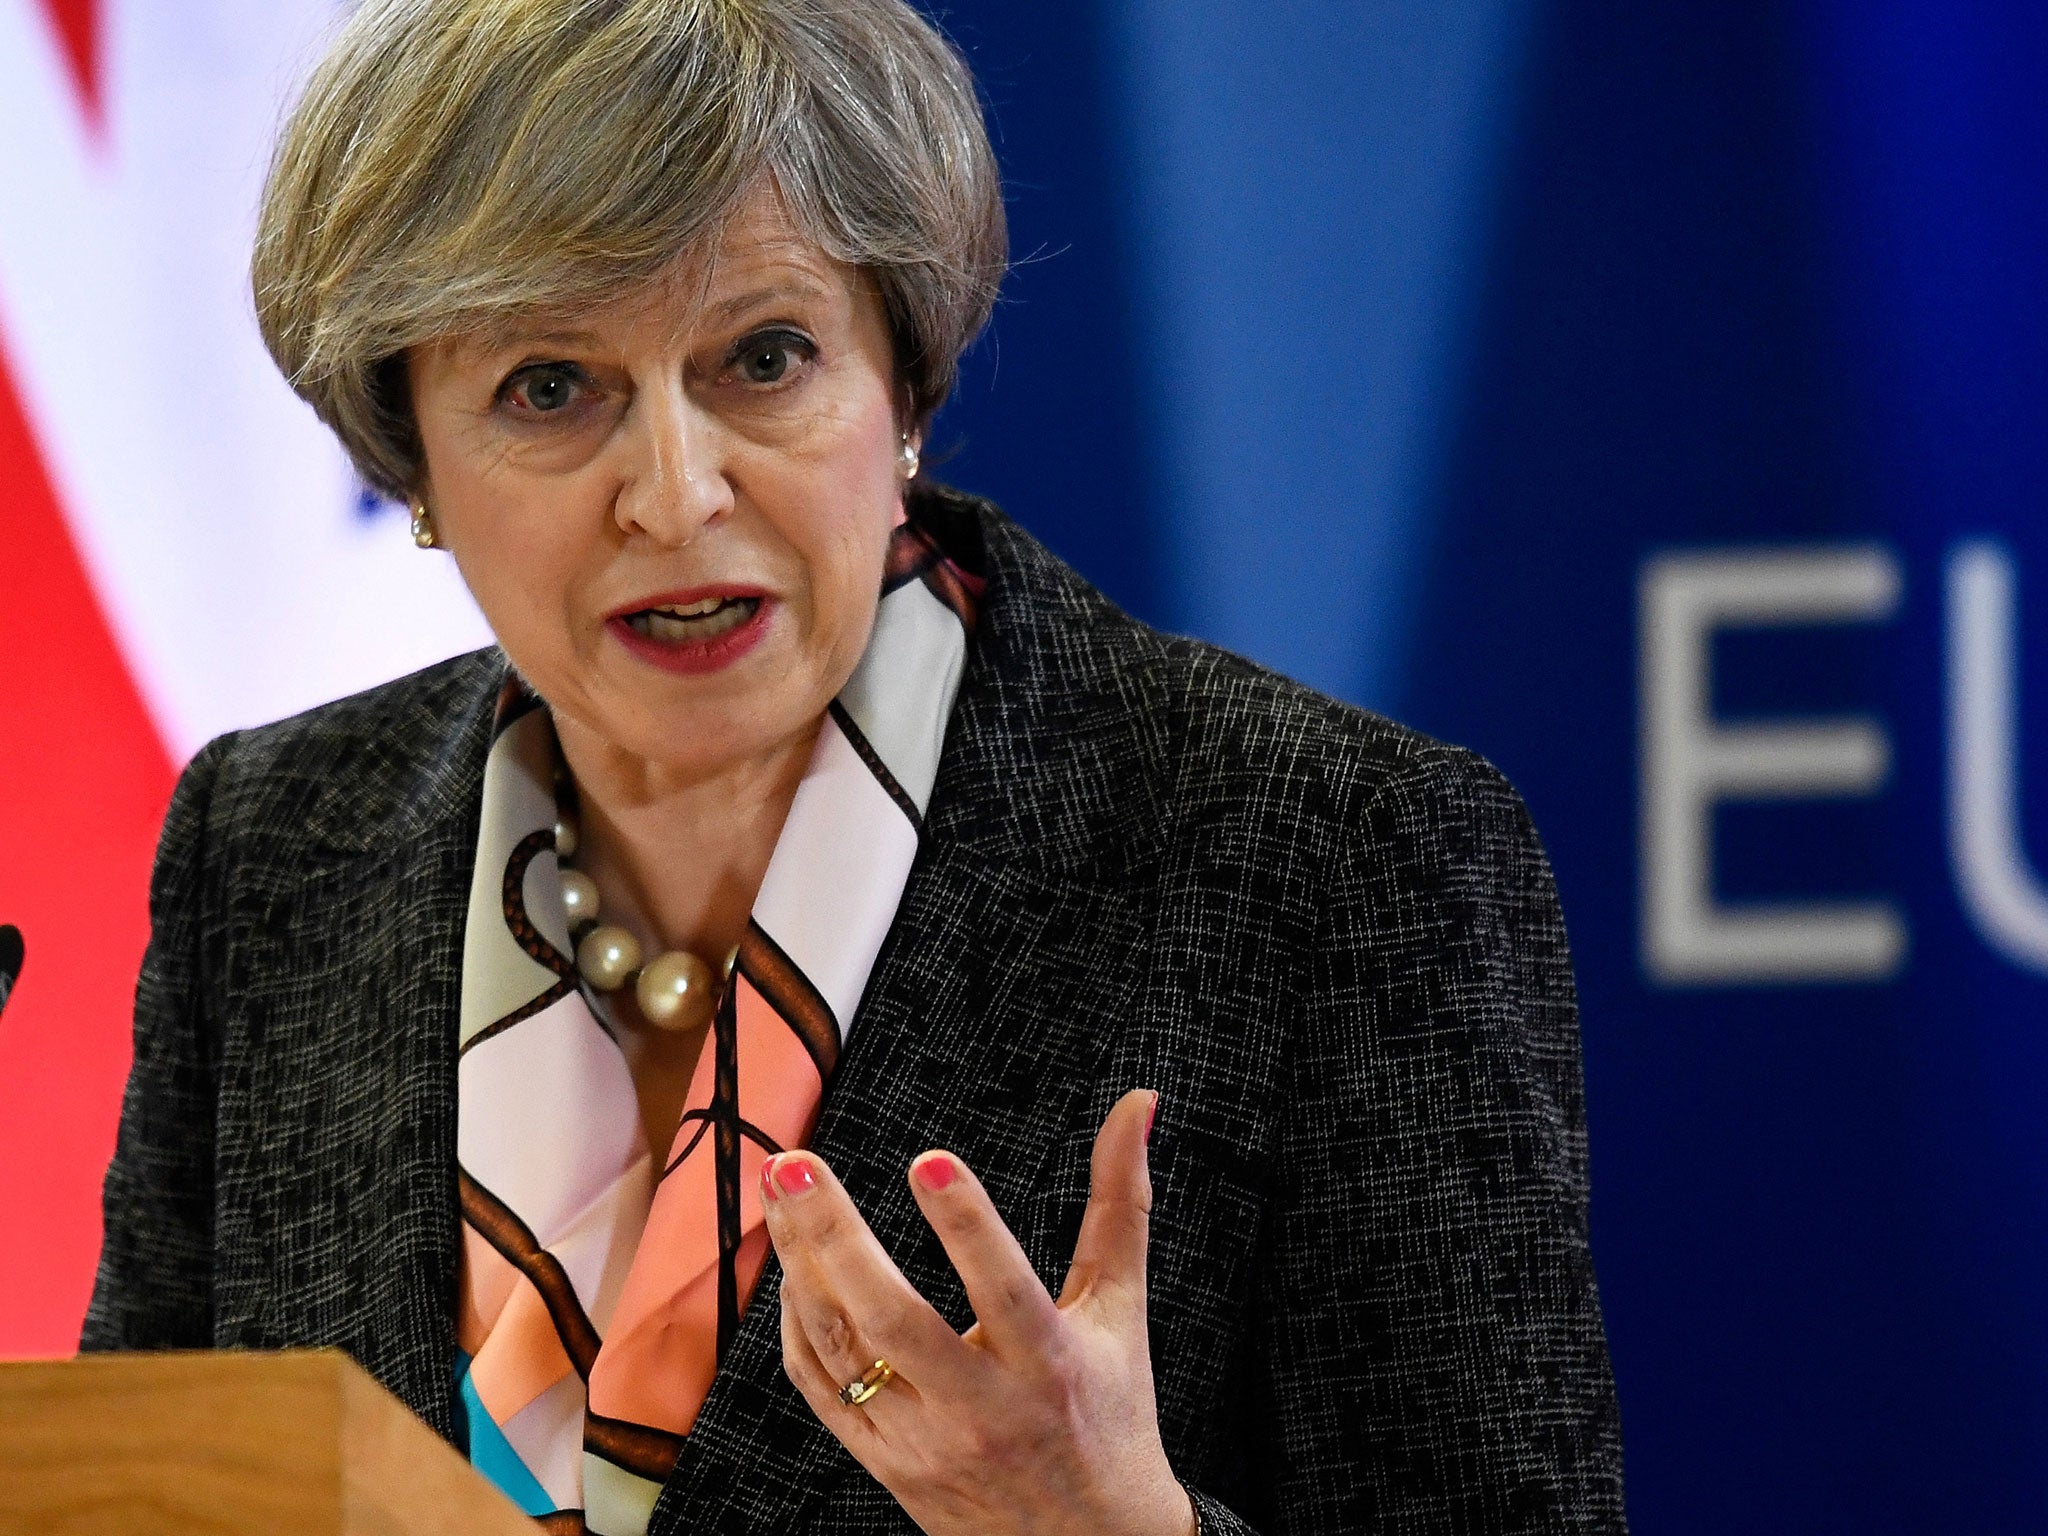 Theresa May attends a news conference during the EU Summit in Brussels